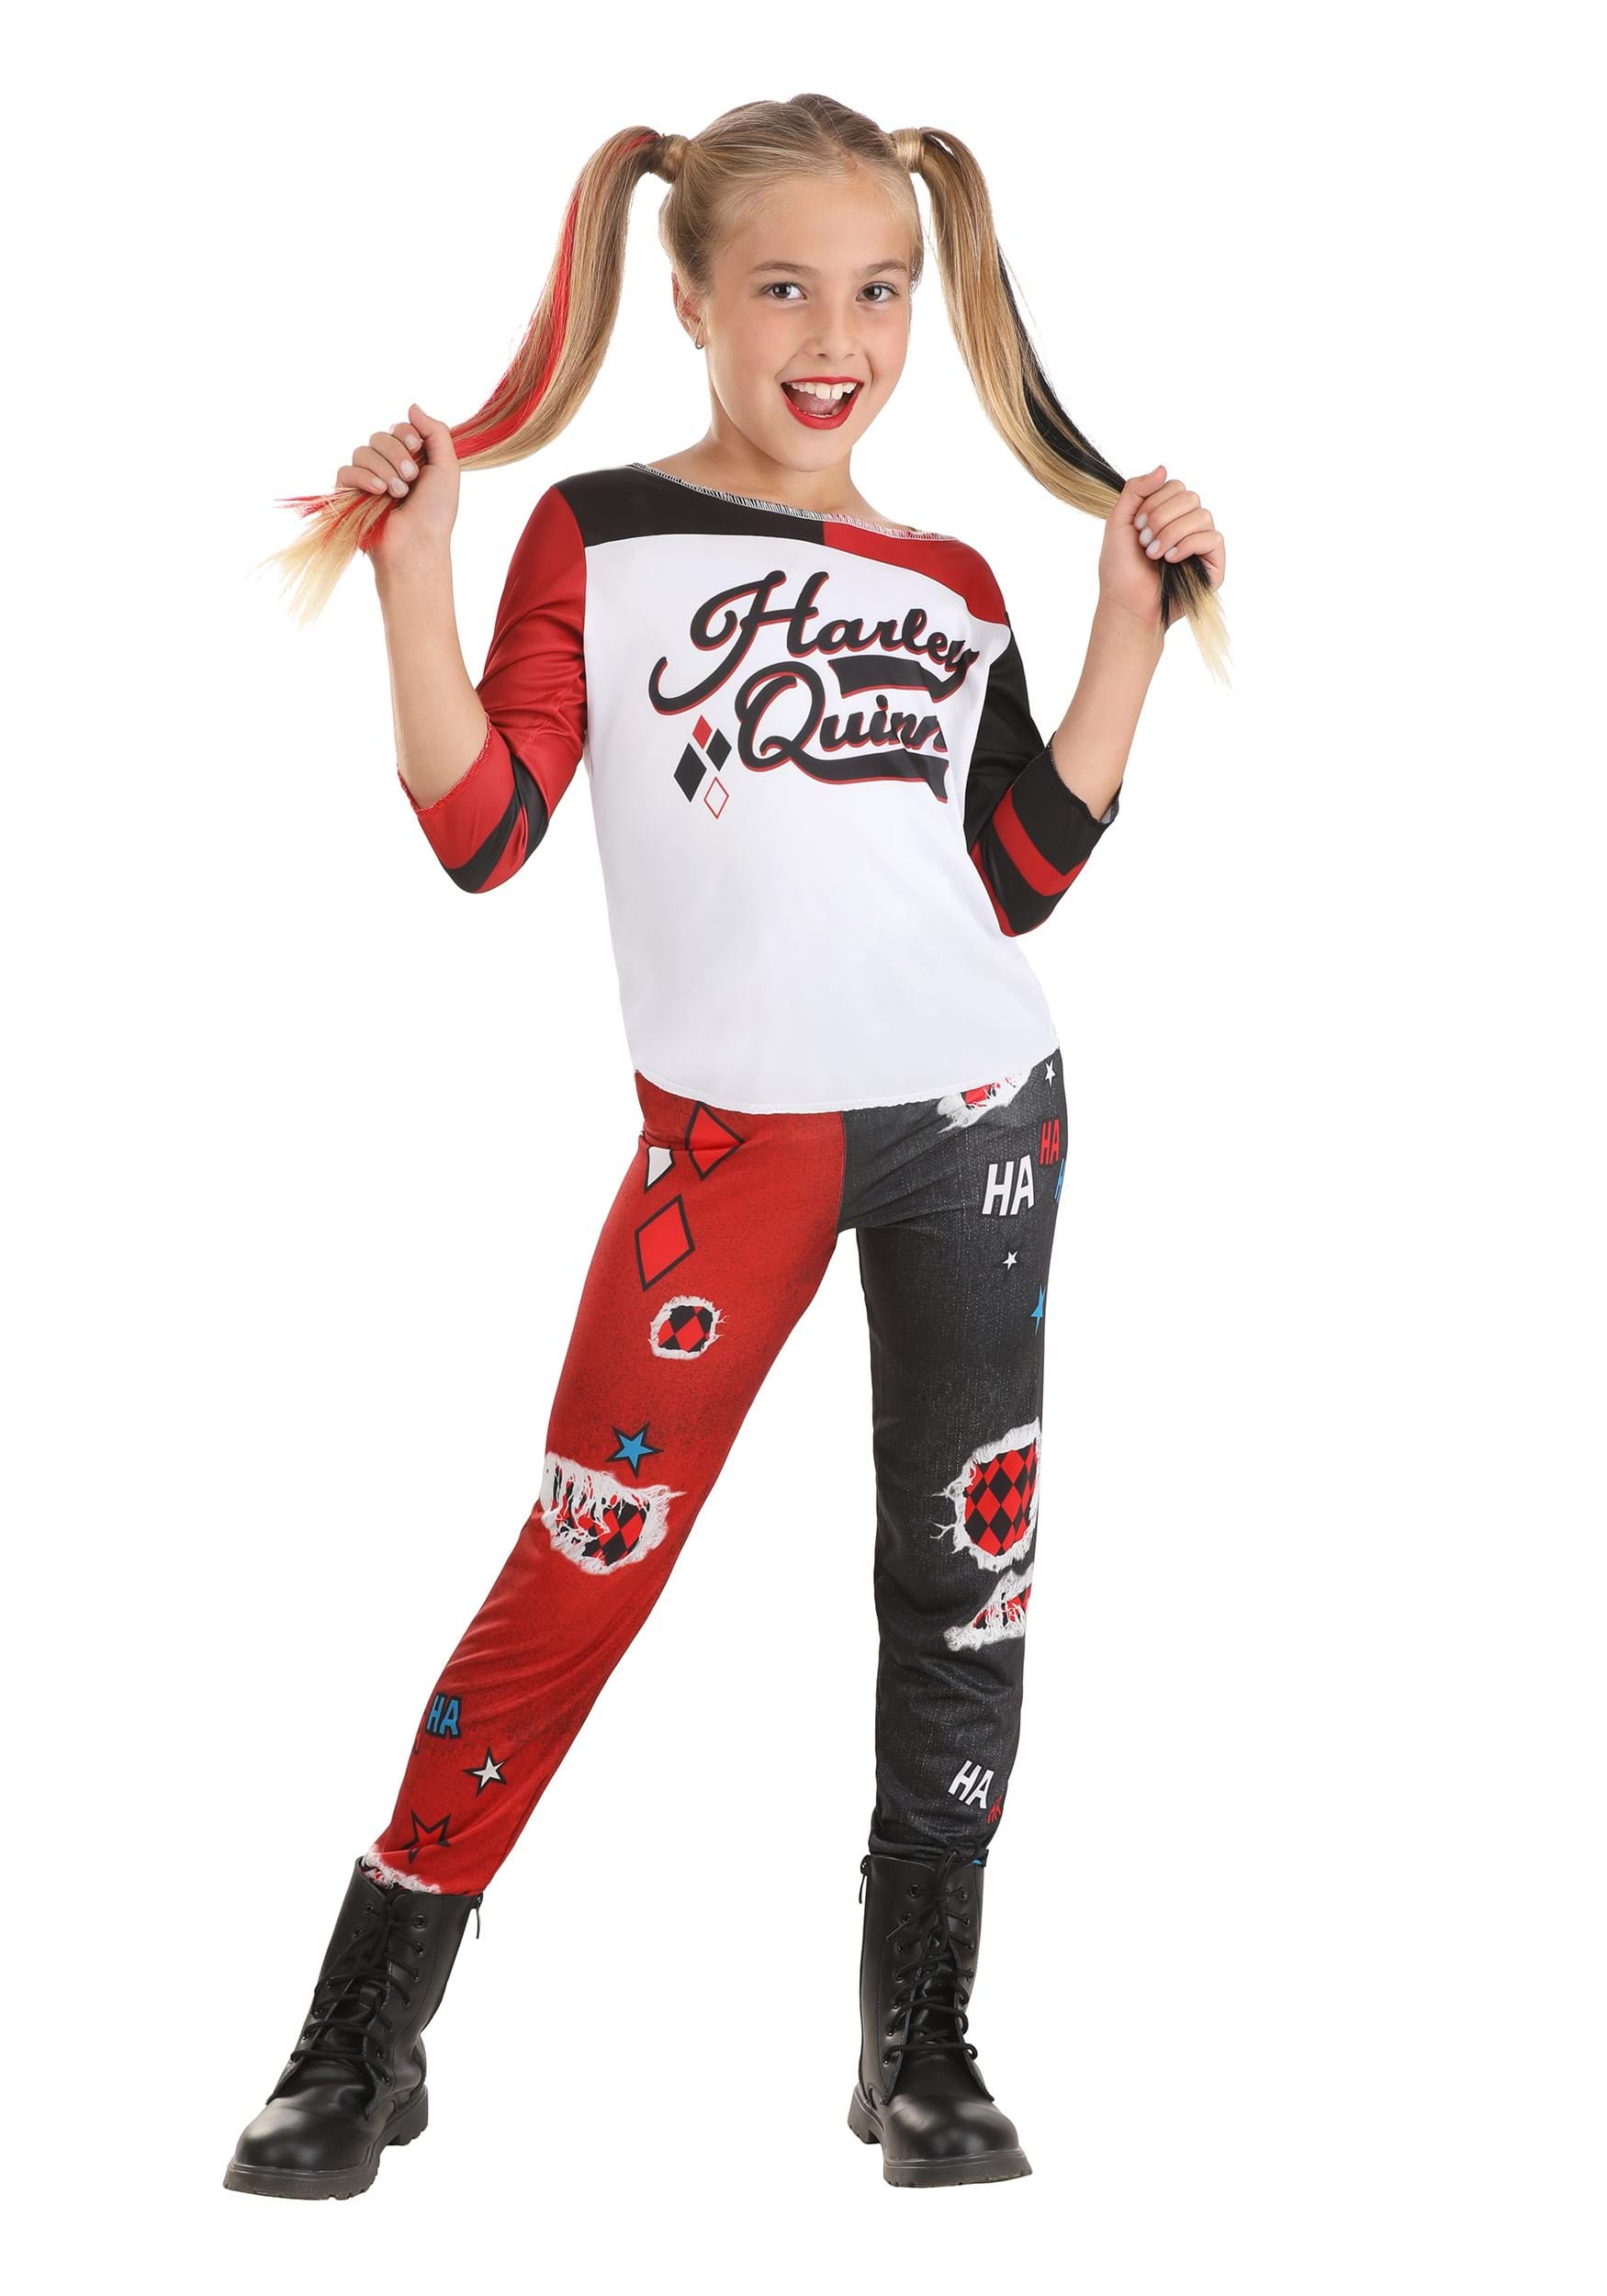 Photos - Fancy Dress Quinn FUN Costumes Harley  Suicide Squad Child Costume Black/Red/Wh 